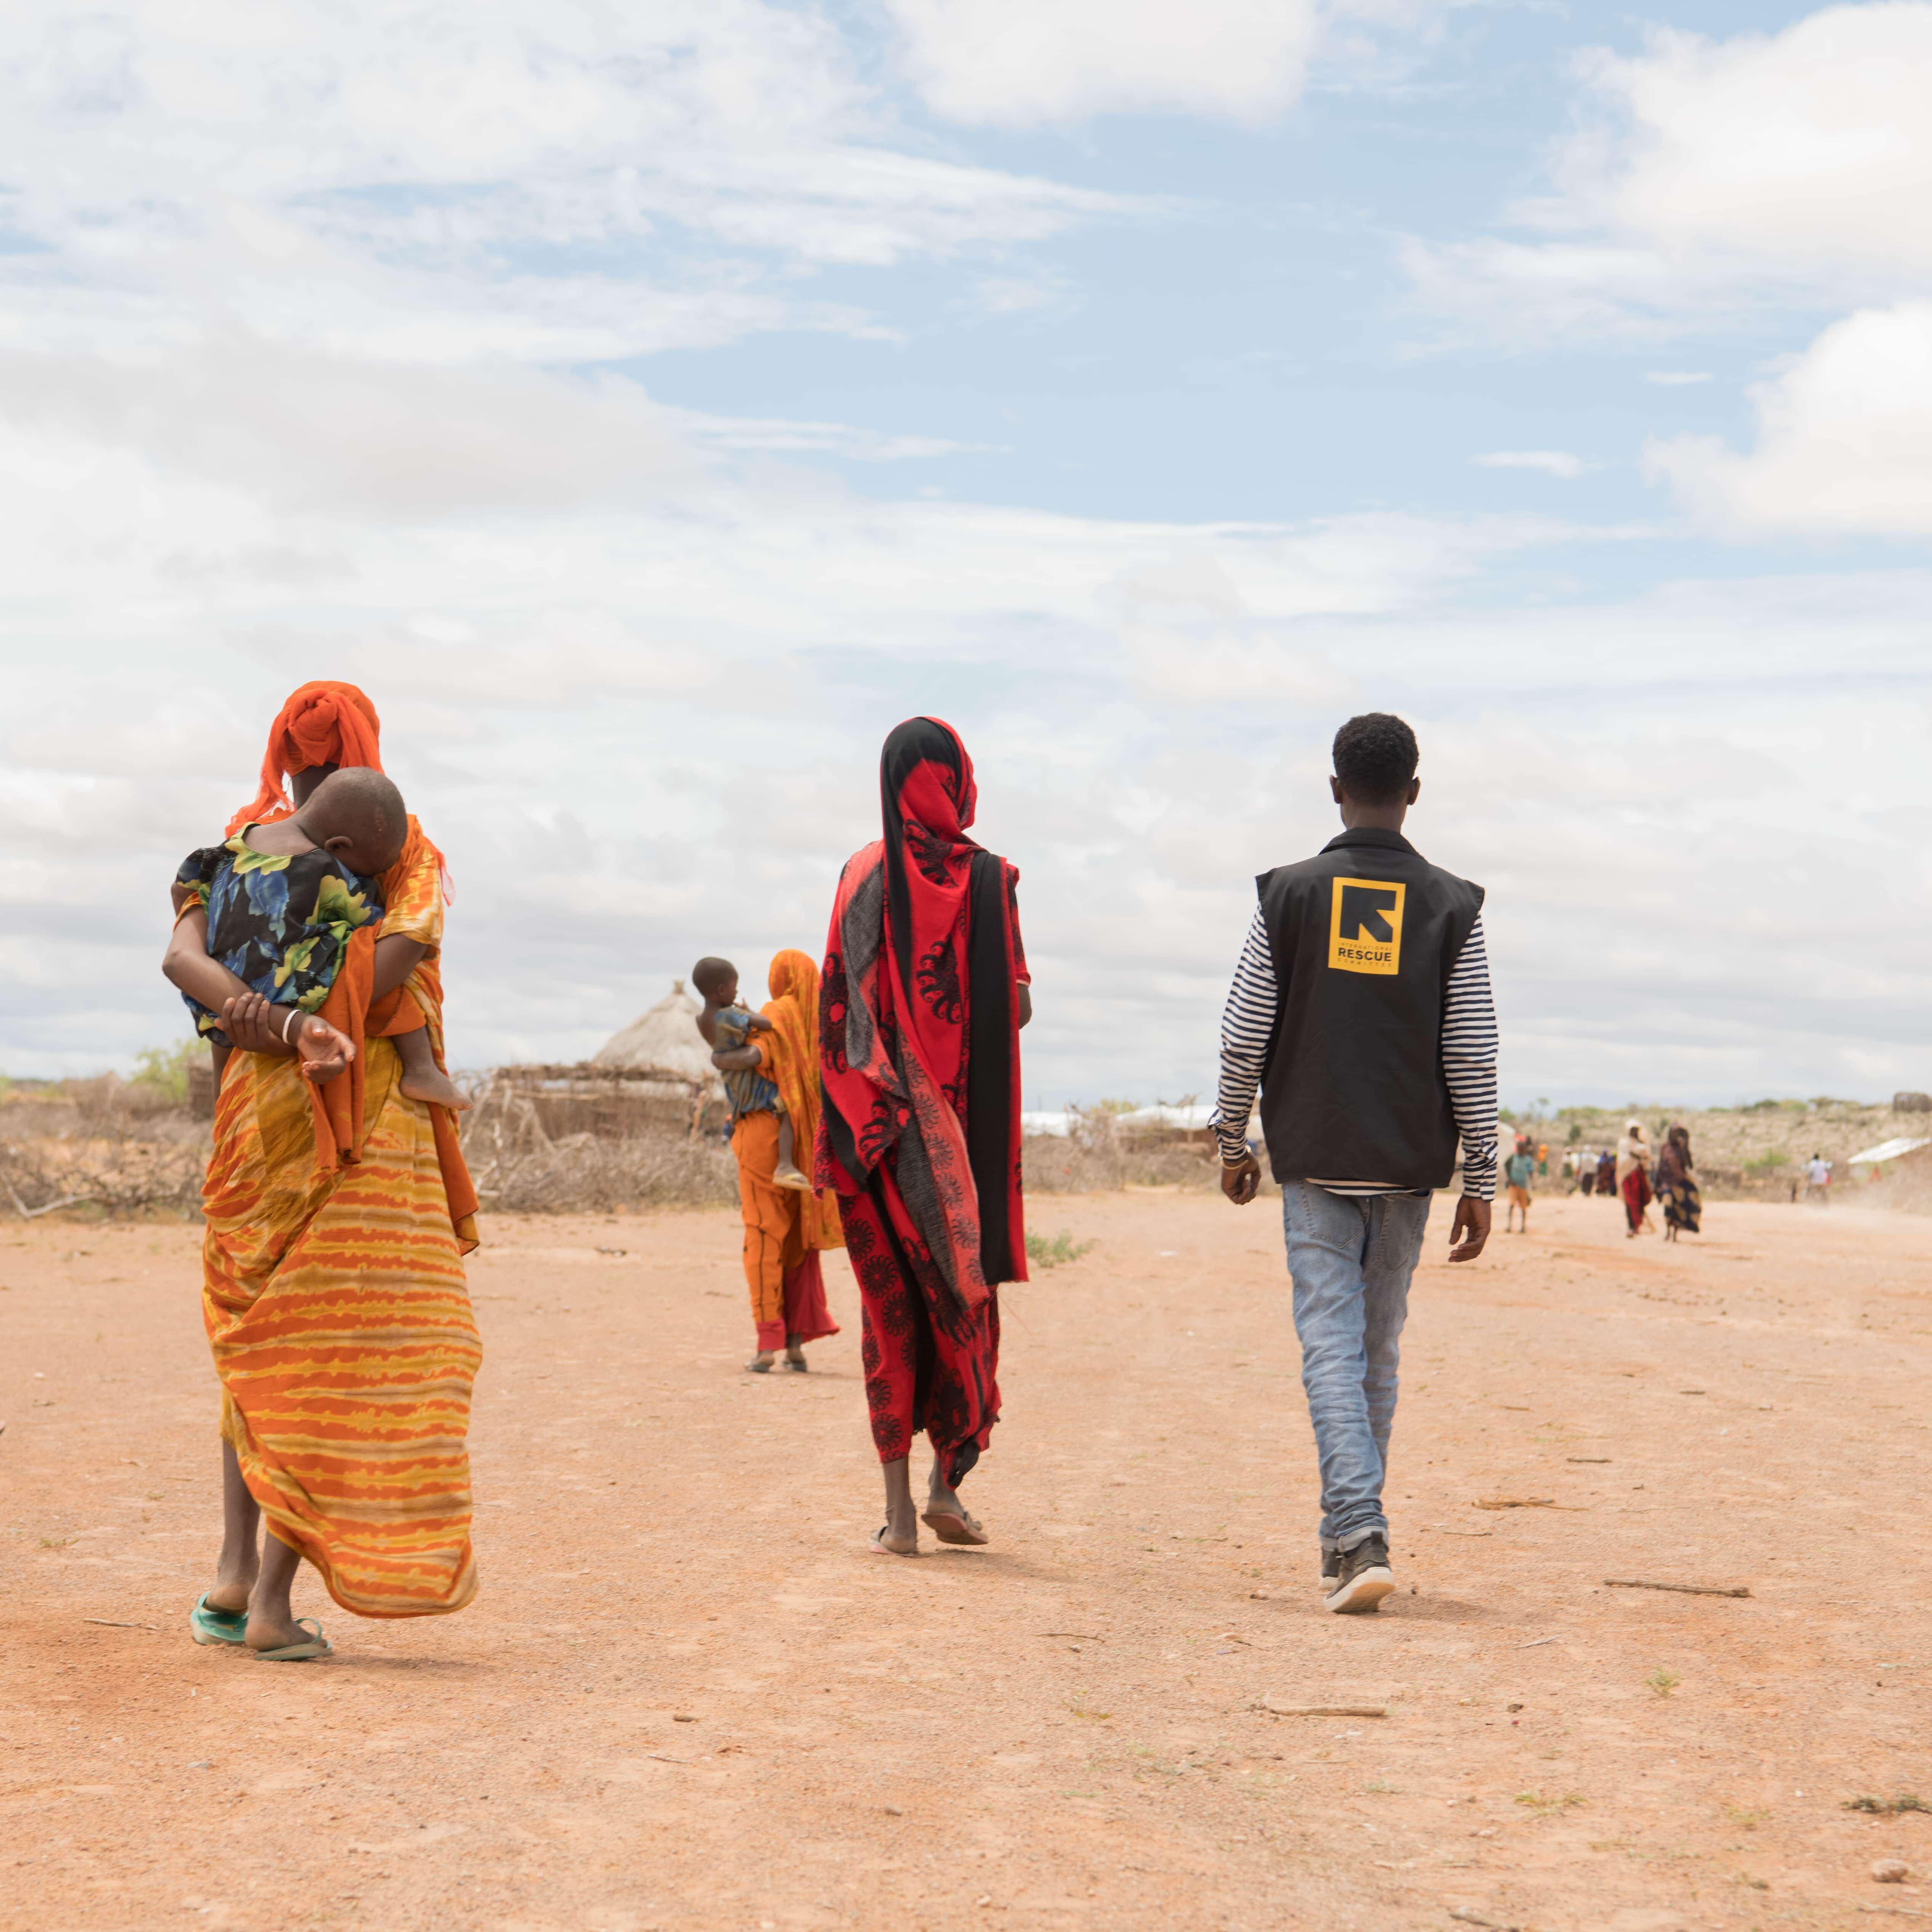 May 23, 2023 - Qudha'ale IDP camp, East Imi District, Ethiopia. An IRC staff walks with Asay Kurba,38, and other women in the camp to the former's home in Qudha'ale IDP camp. IDP women are seen walking in Qudha'ale IDP camp.